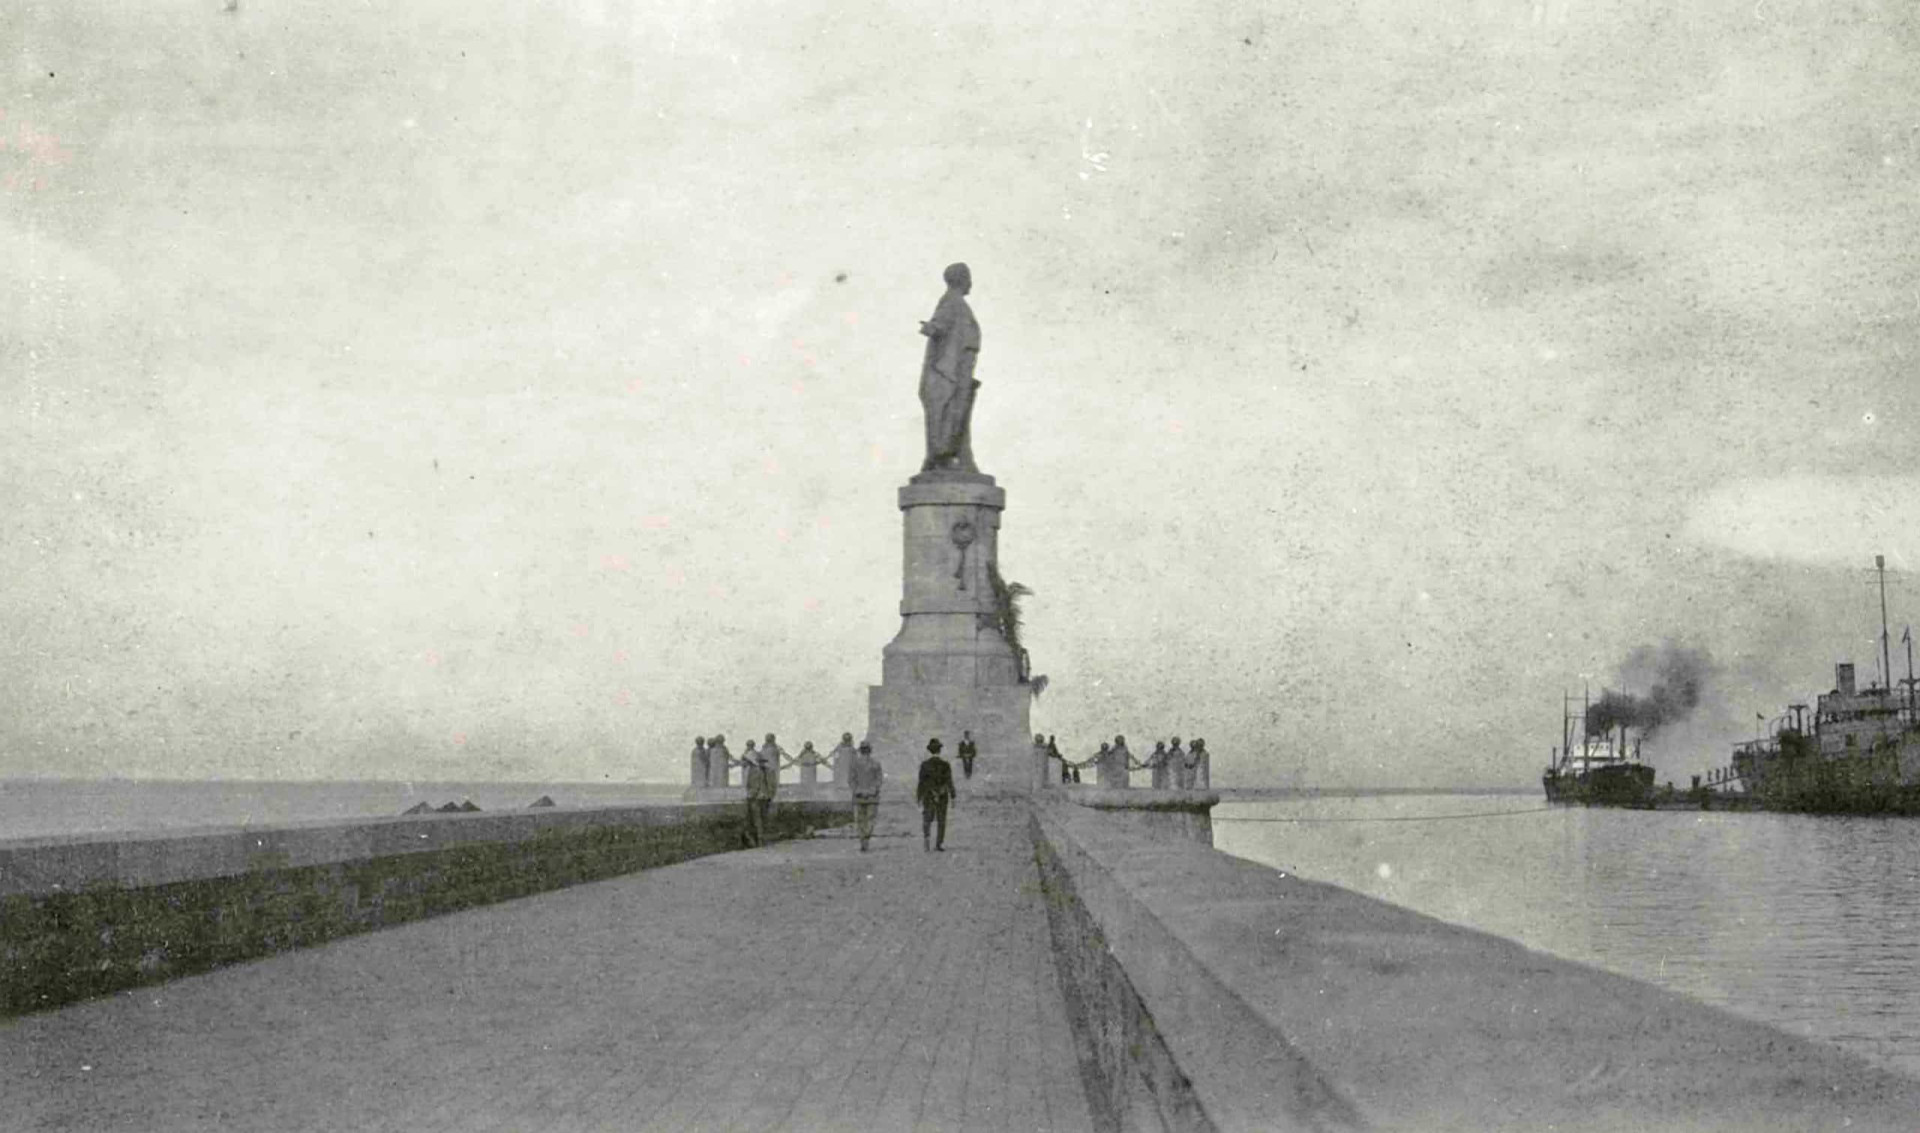 <p>The statue stood from November 17, 1899 to December 23, 1956. It was later moved to stand in the Port Fouad shipyard, then it was relocated in October 2020 to the Suez Canal International Museum in Ismailia.</p><p>You may also like:<a href="https://www.starsinsider.com/n/347016?utm_source=msn.com&utm_medium=display&utm_campaign=referral_description&utm_content=455090v9en-en_selected"> Ridiculous things that only happen in Hollywood movies </a></p>